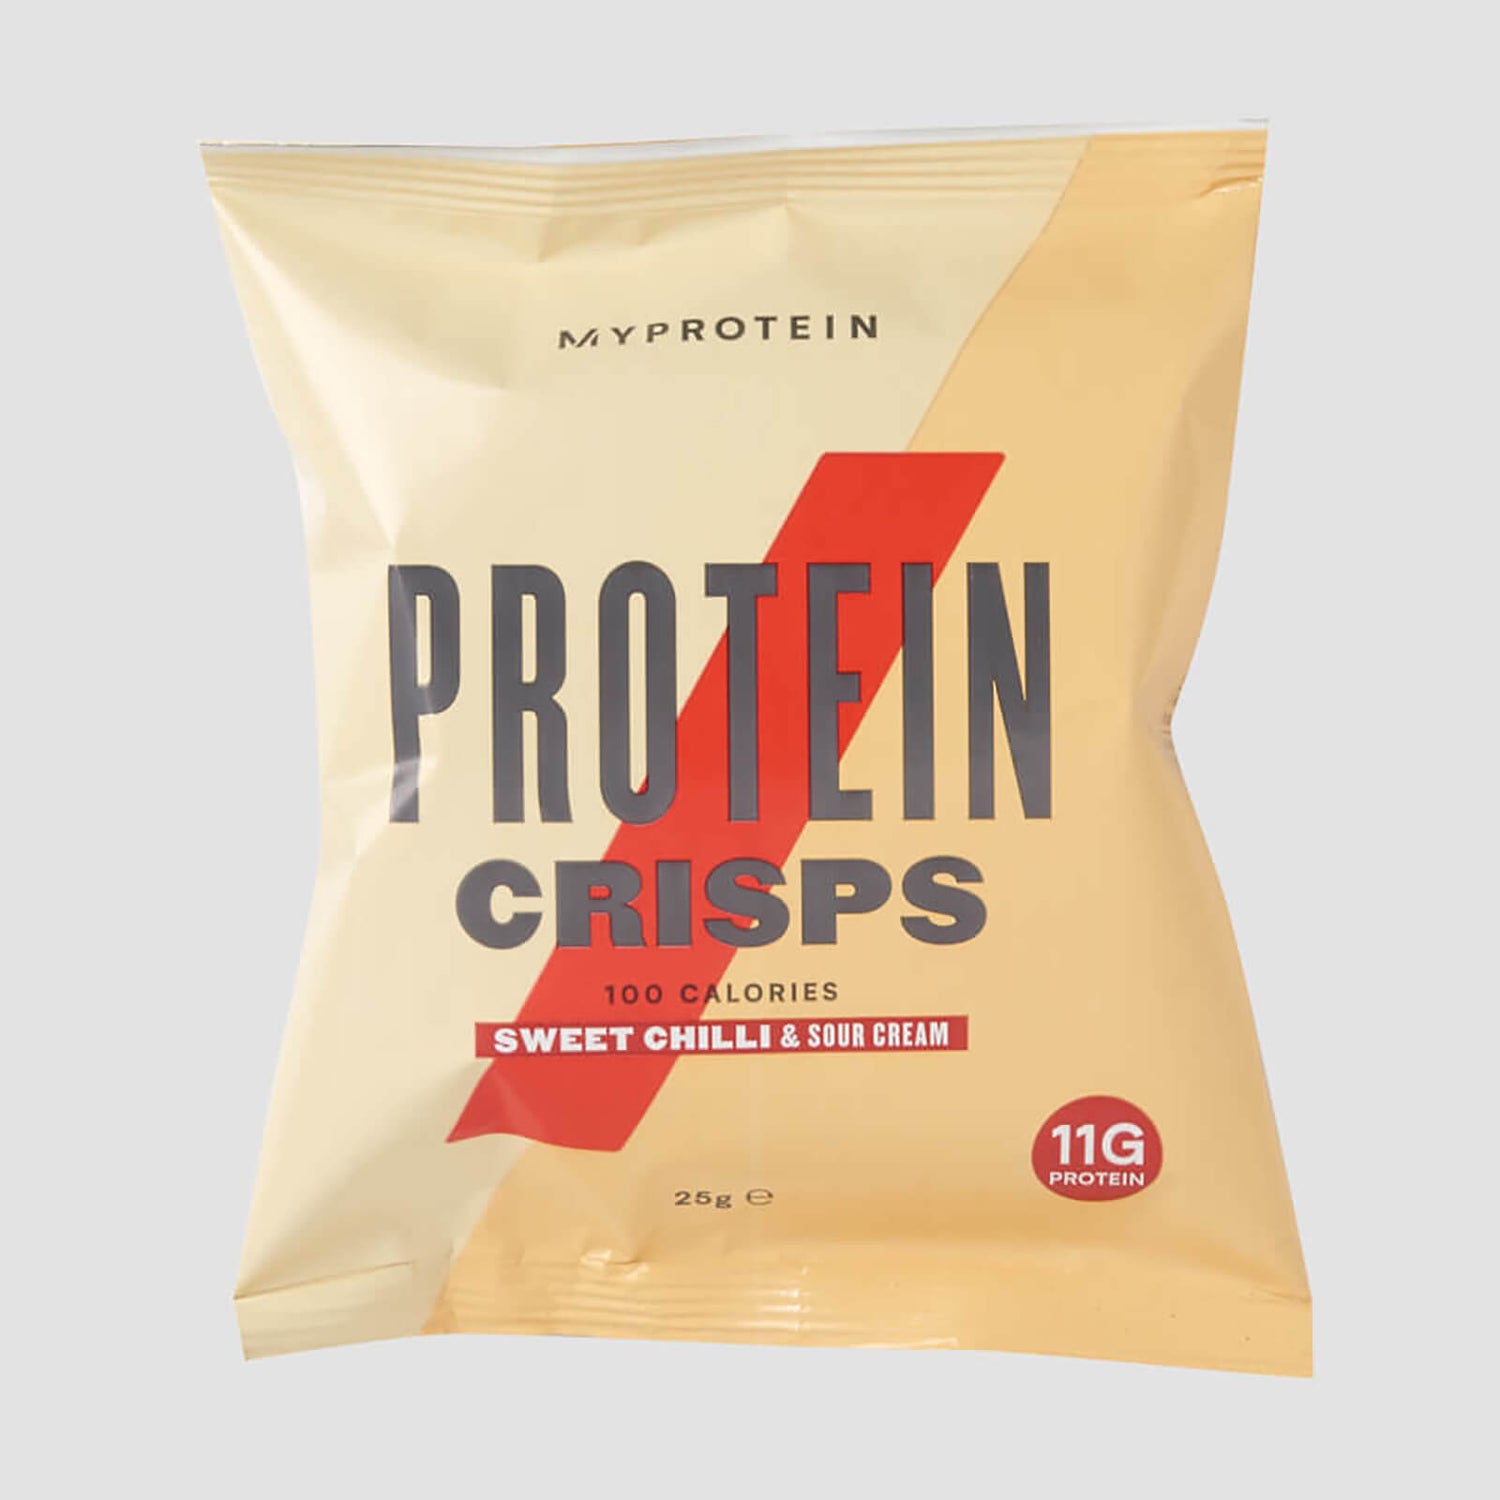 Protein Chips (Sample)